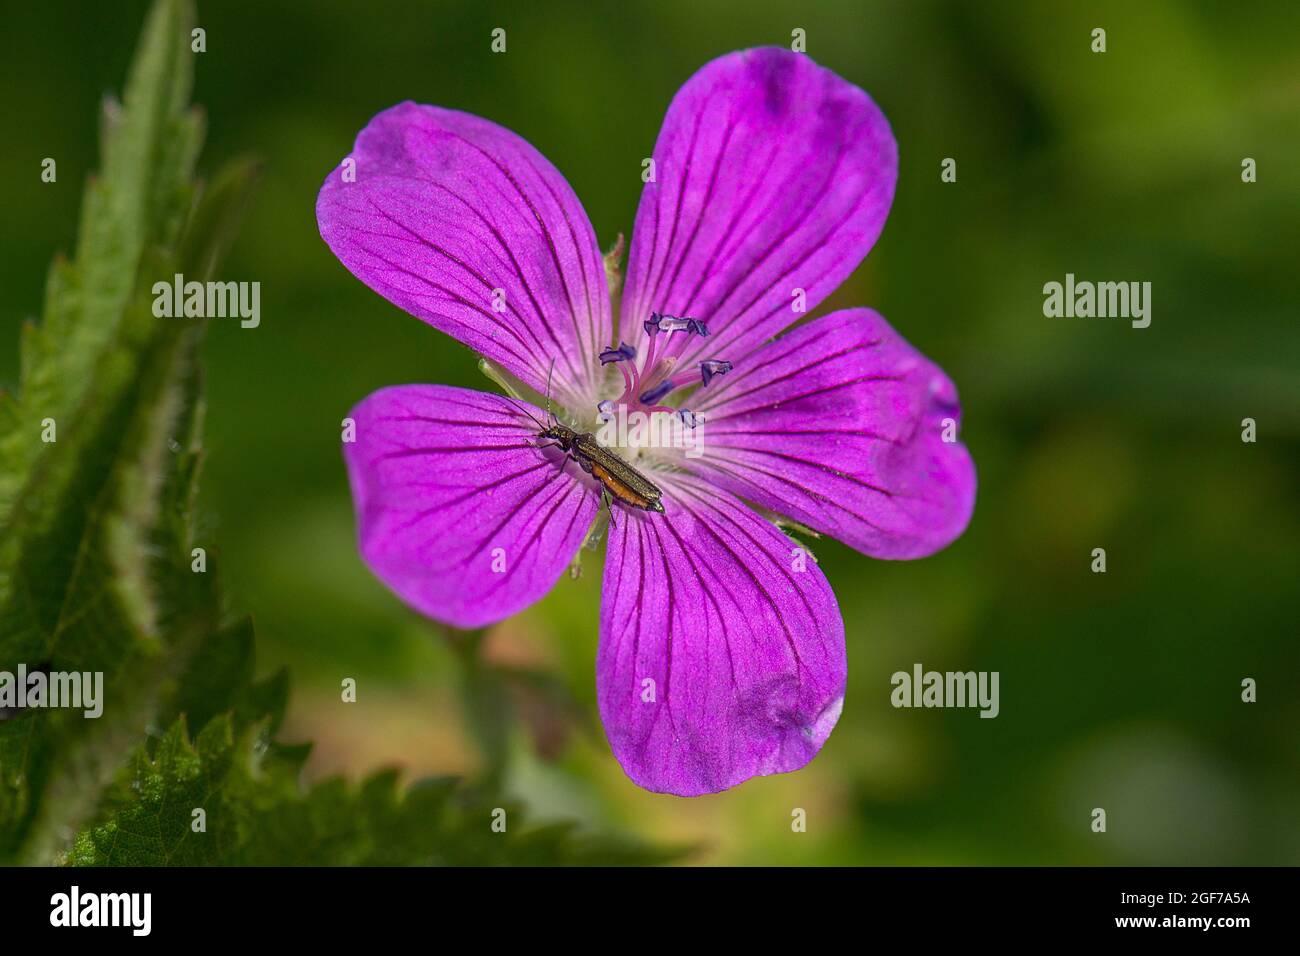 Flower of the blood-red Bloody cranesbill (Geranium sanguineum) with a beetle, Bavaria, Germany Stock Photo